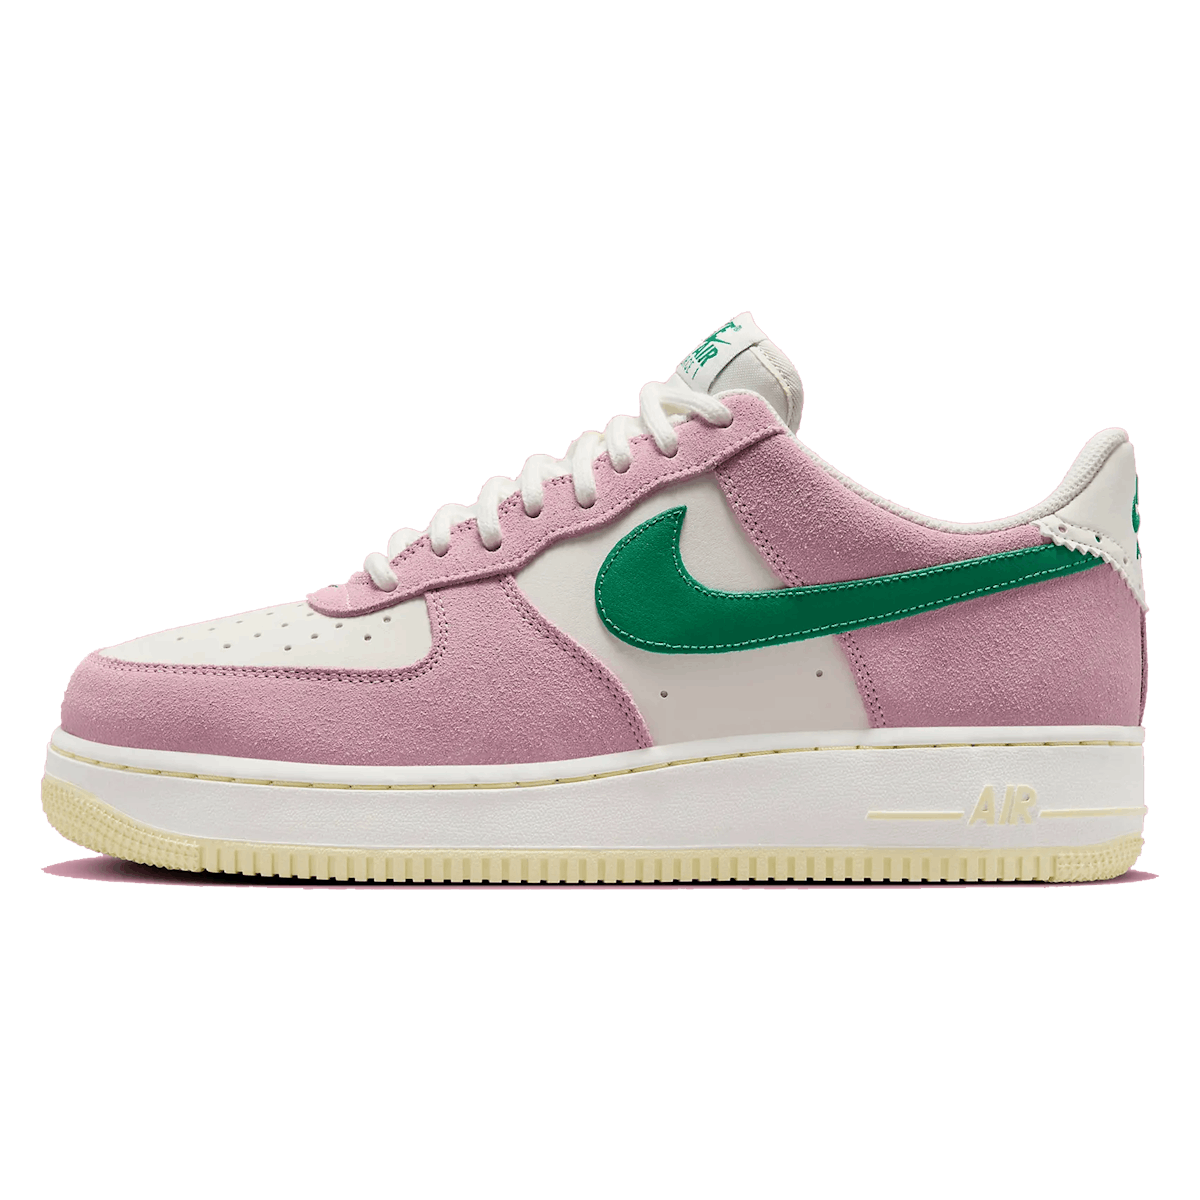 Nike Air Force 1 '07 LV8 "Soft Pink"